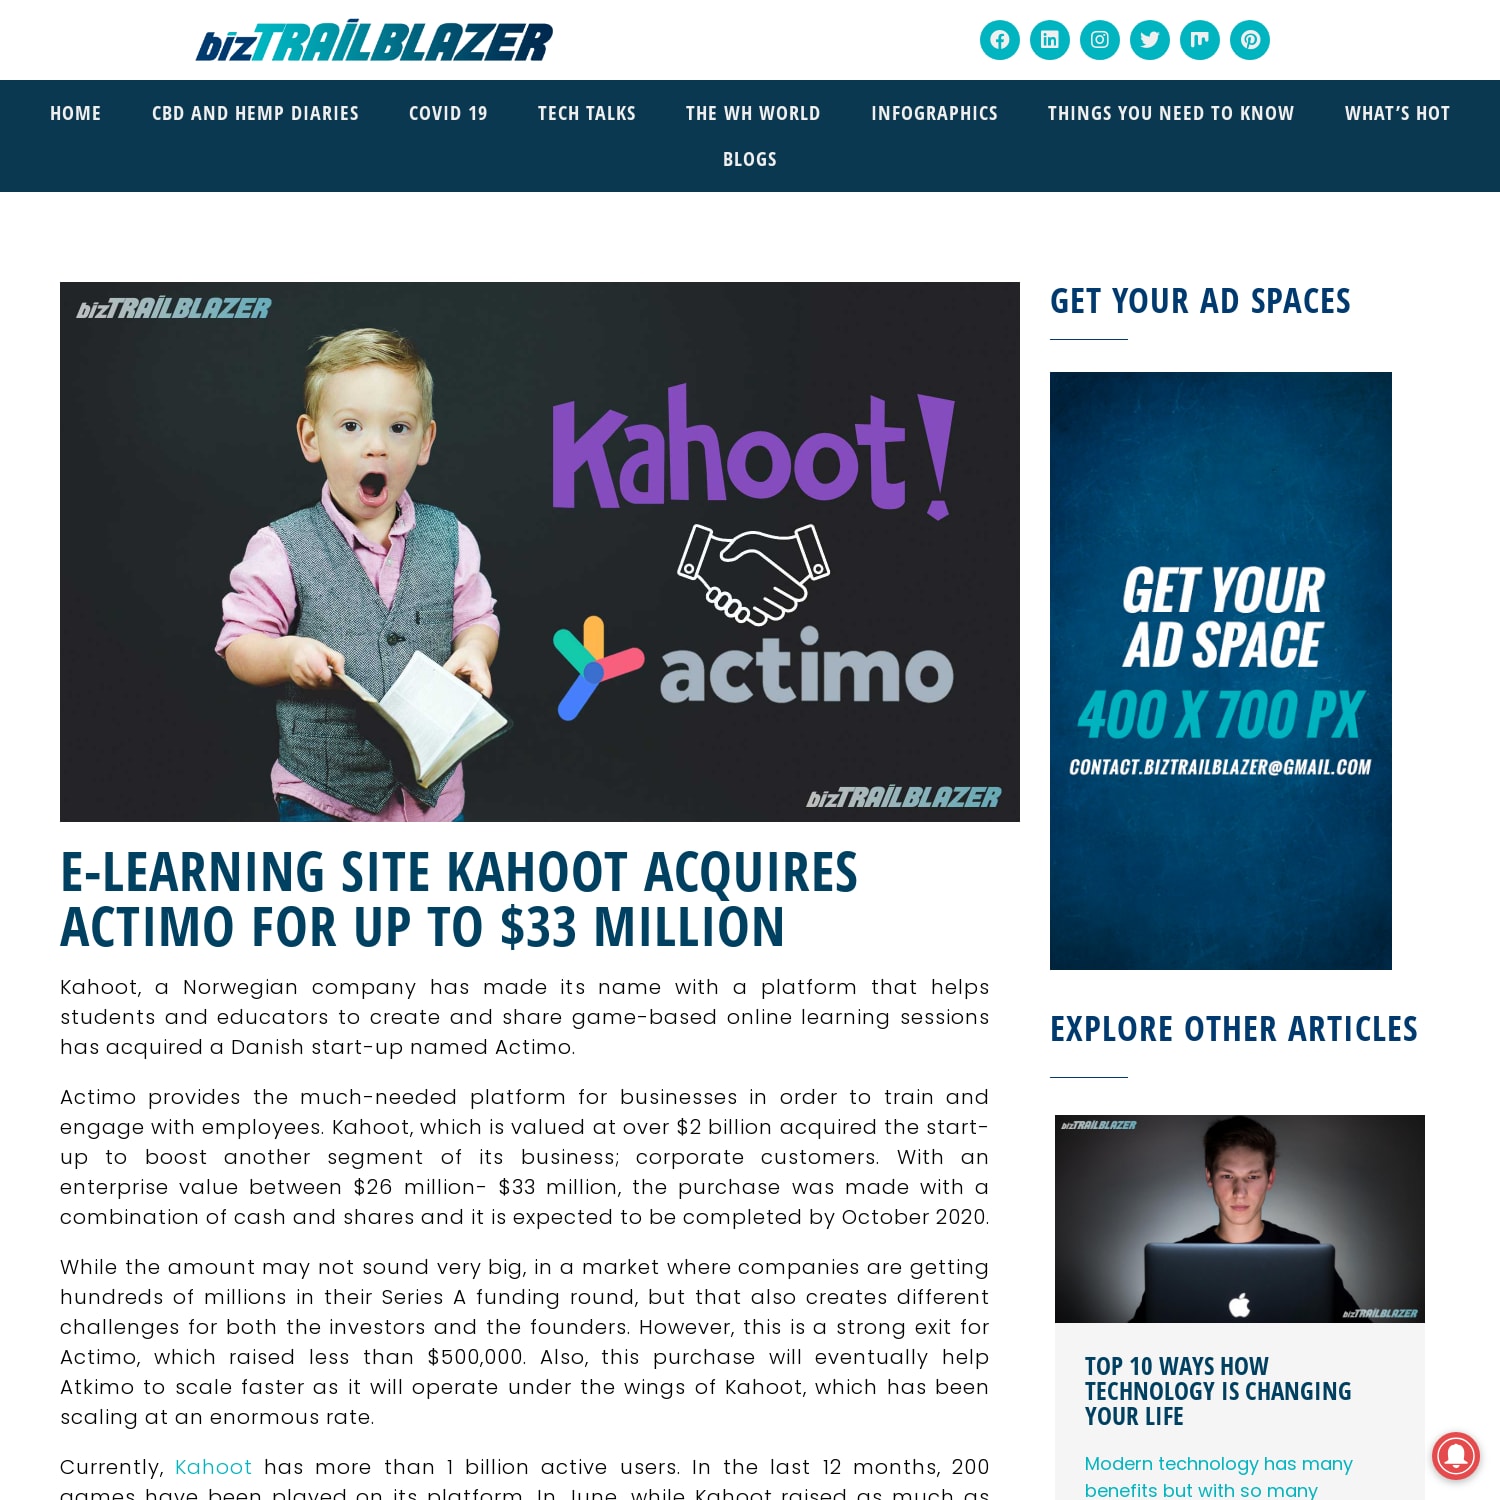 e-learning Site Kahoot Acquires Actimo for up to $33 million